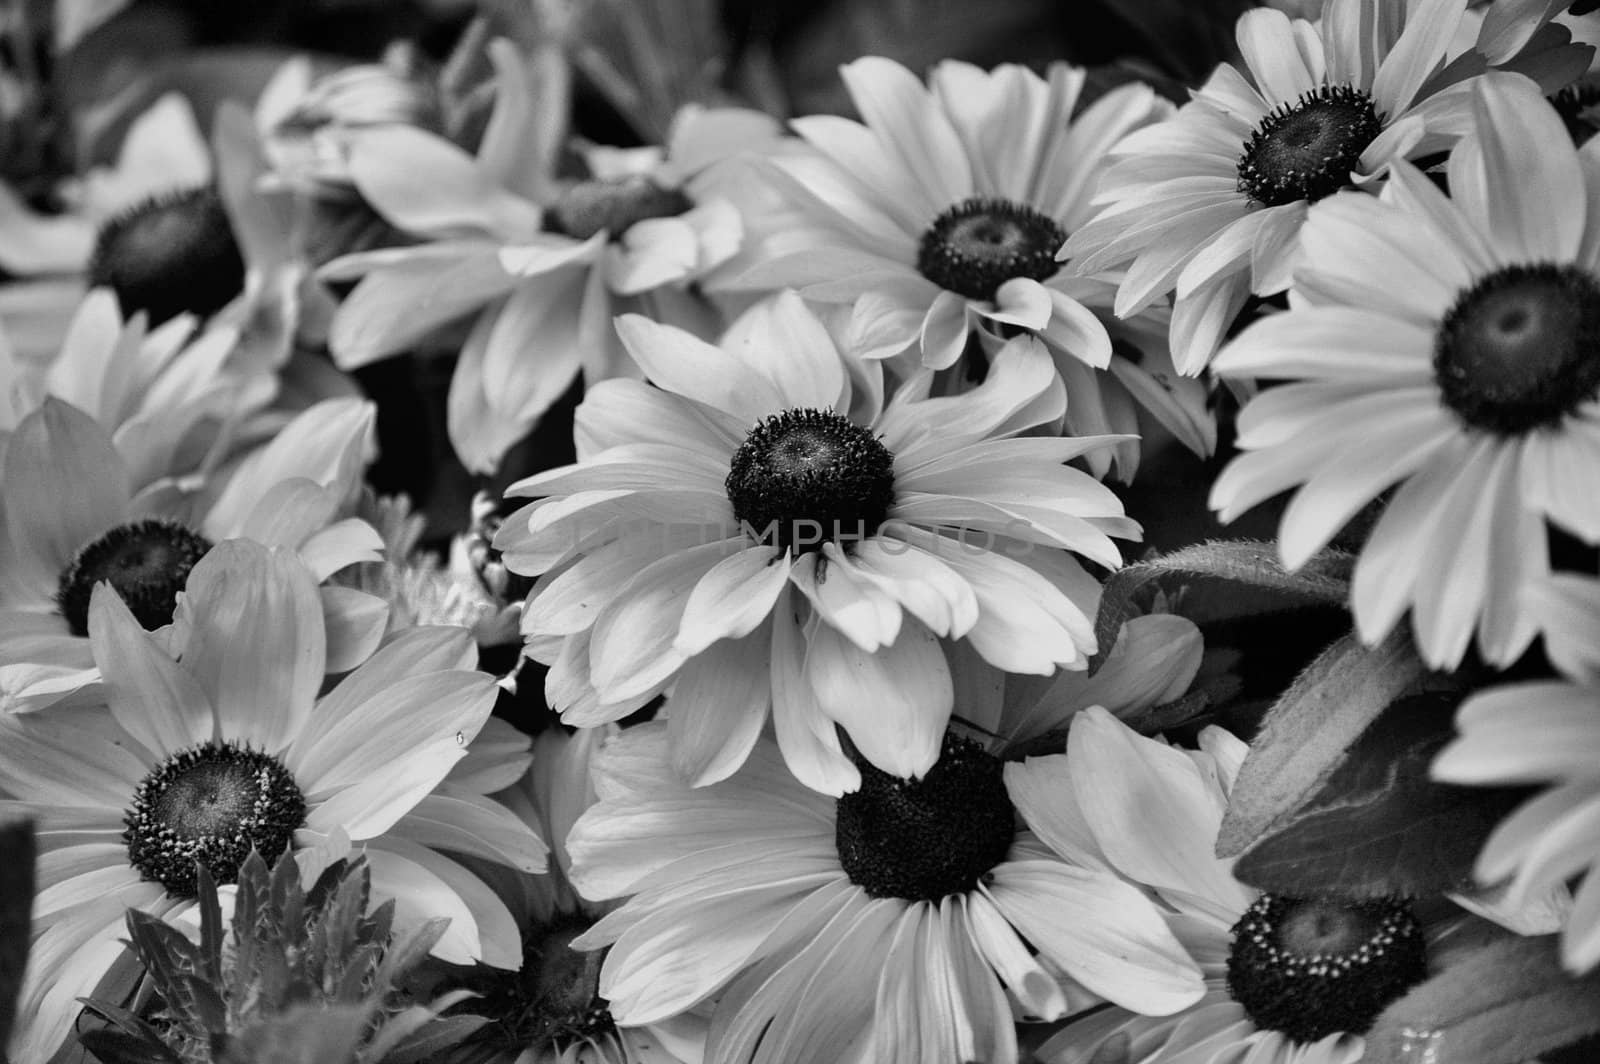 Flowers up close by northwoodsphoto